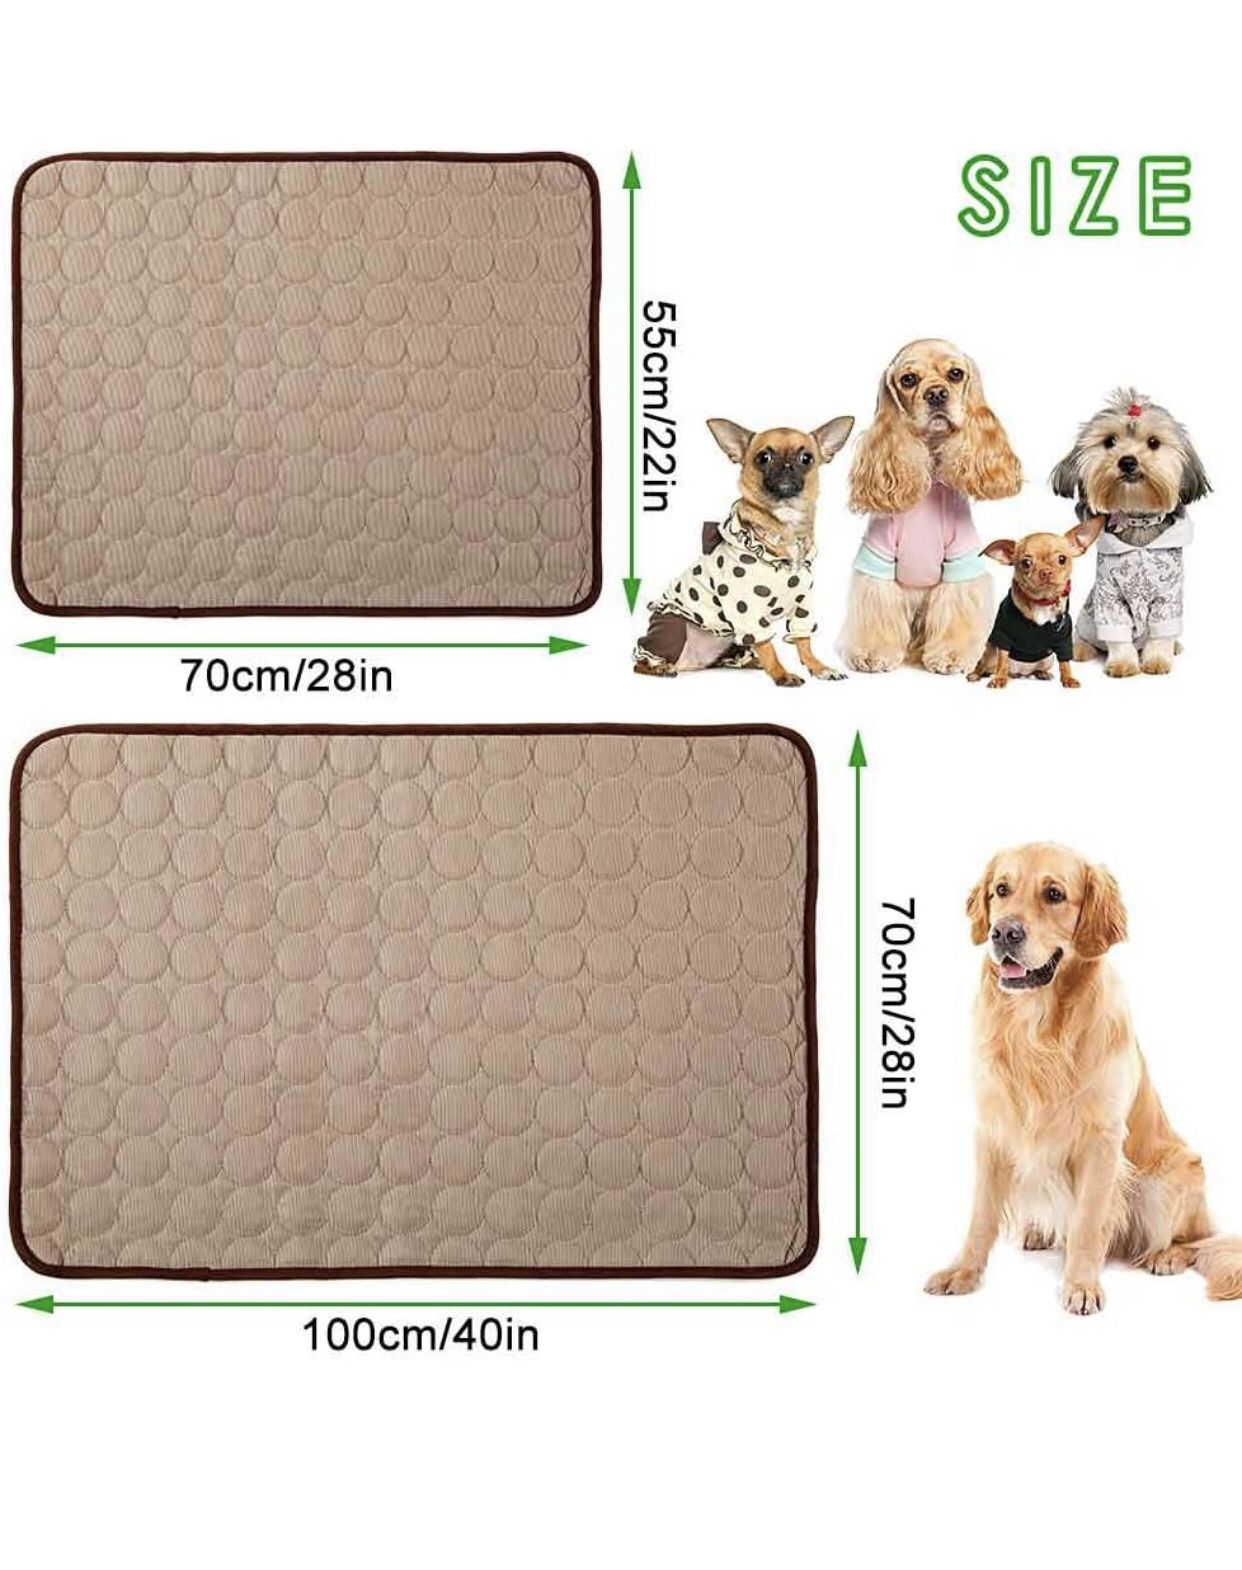 Jaaytct Cooling Mat for Dogs Cats Ice Silk Pet Self Cooling Pad Blanket for Pet Beds/Kennels/Couches /Car Seats/Floors